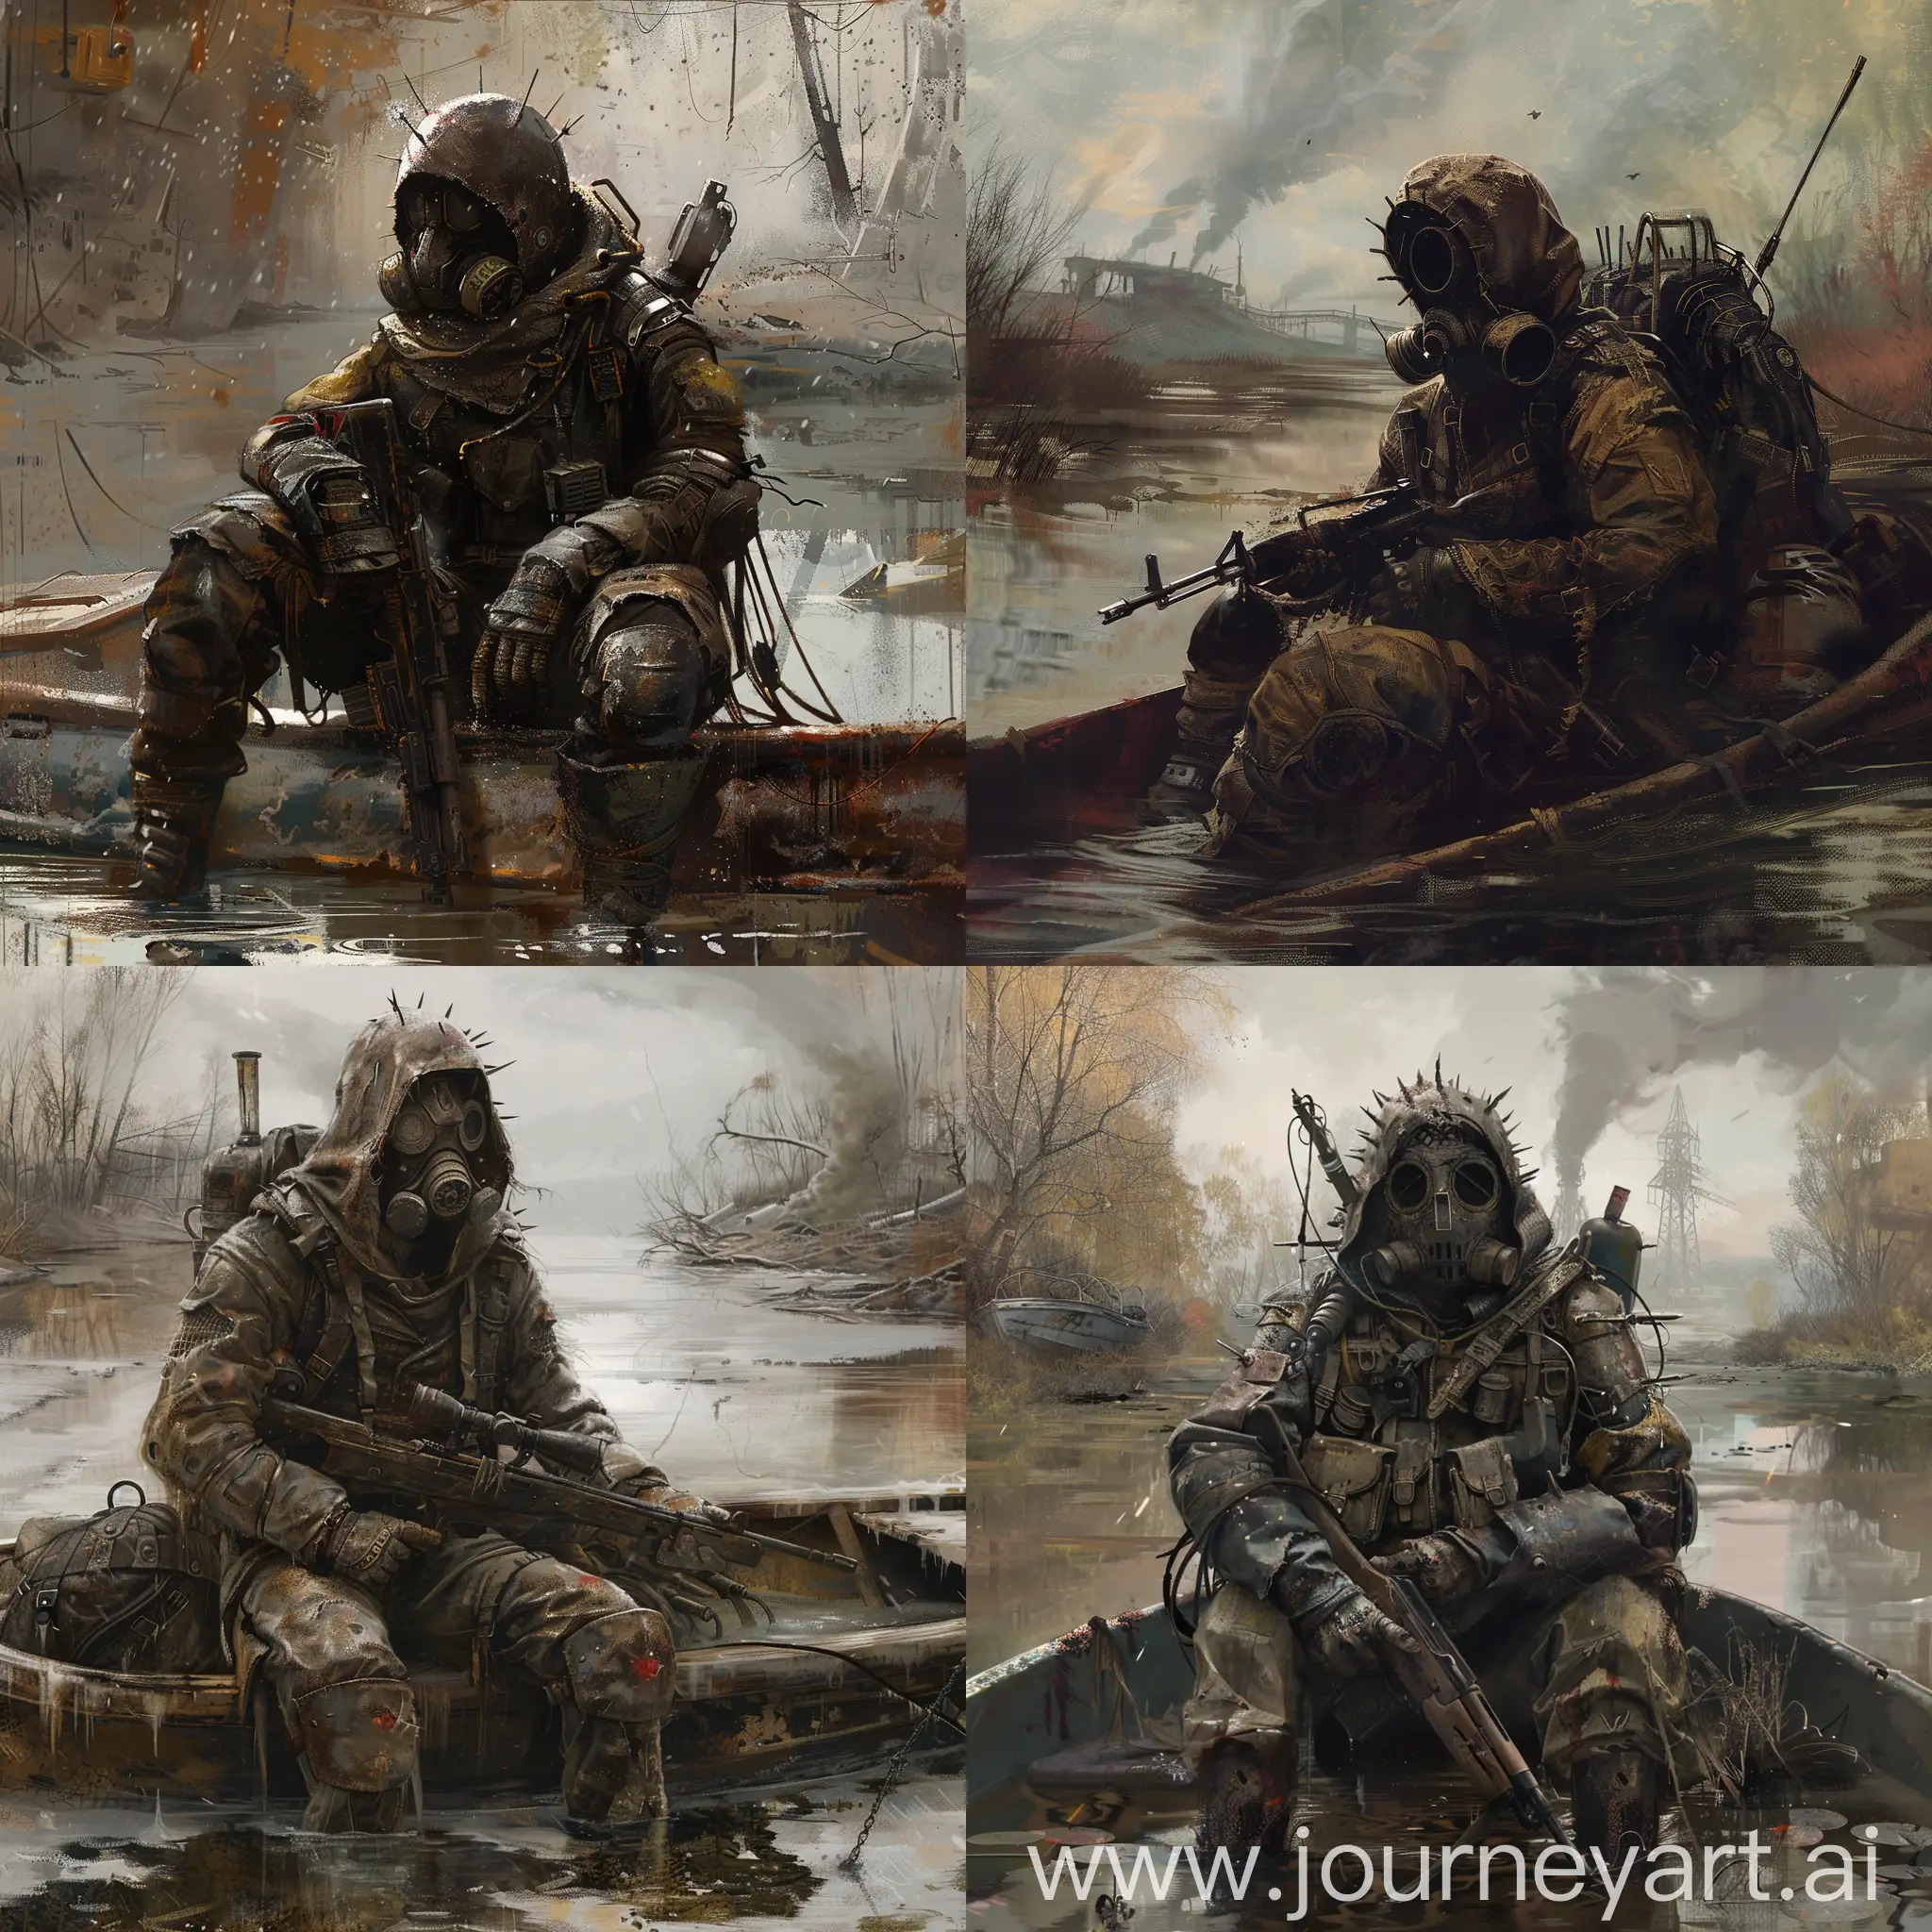 Stalker-with-Sniper-Rifle-in-Radioactive-Swamp-Autumn-Scene